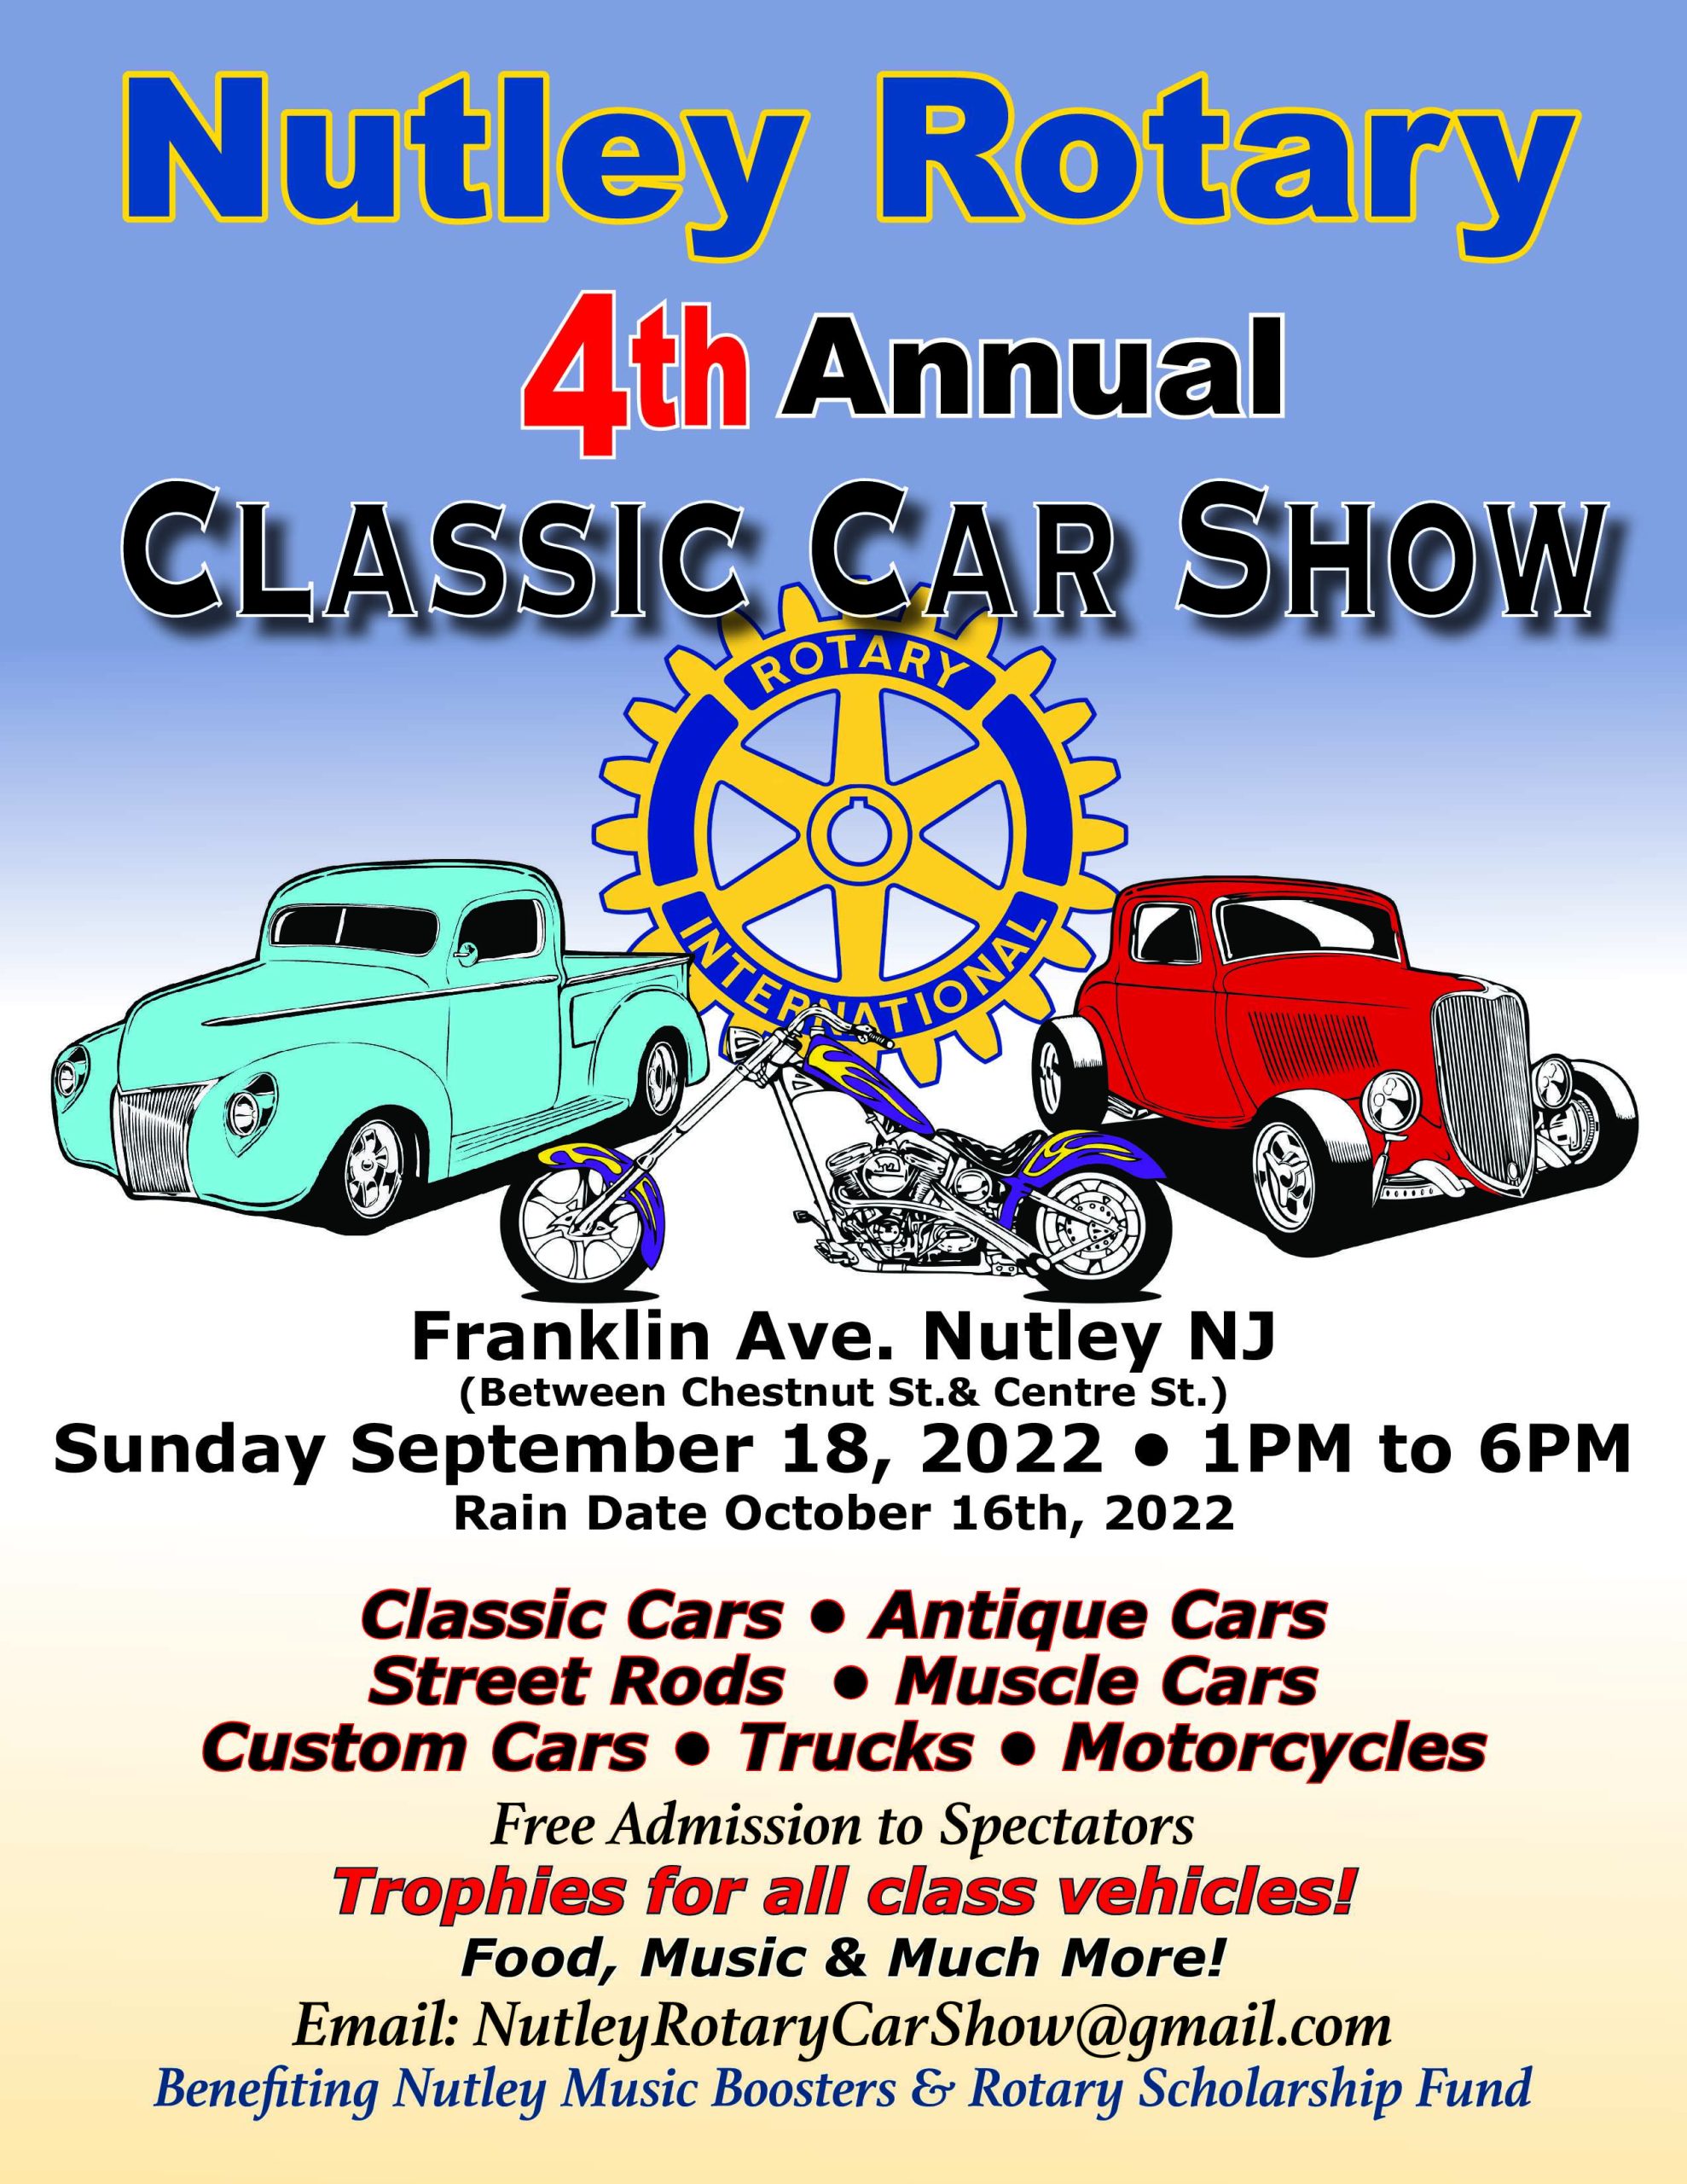 Nutley Rotary Car and Motorcycle Show